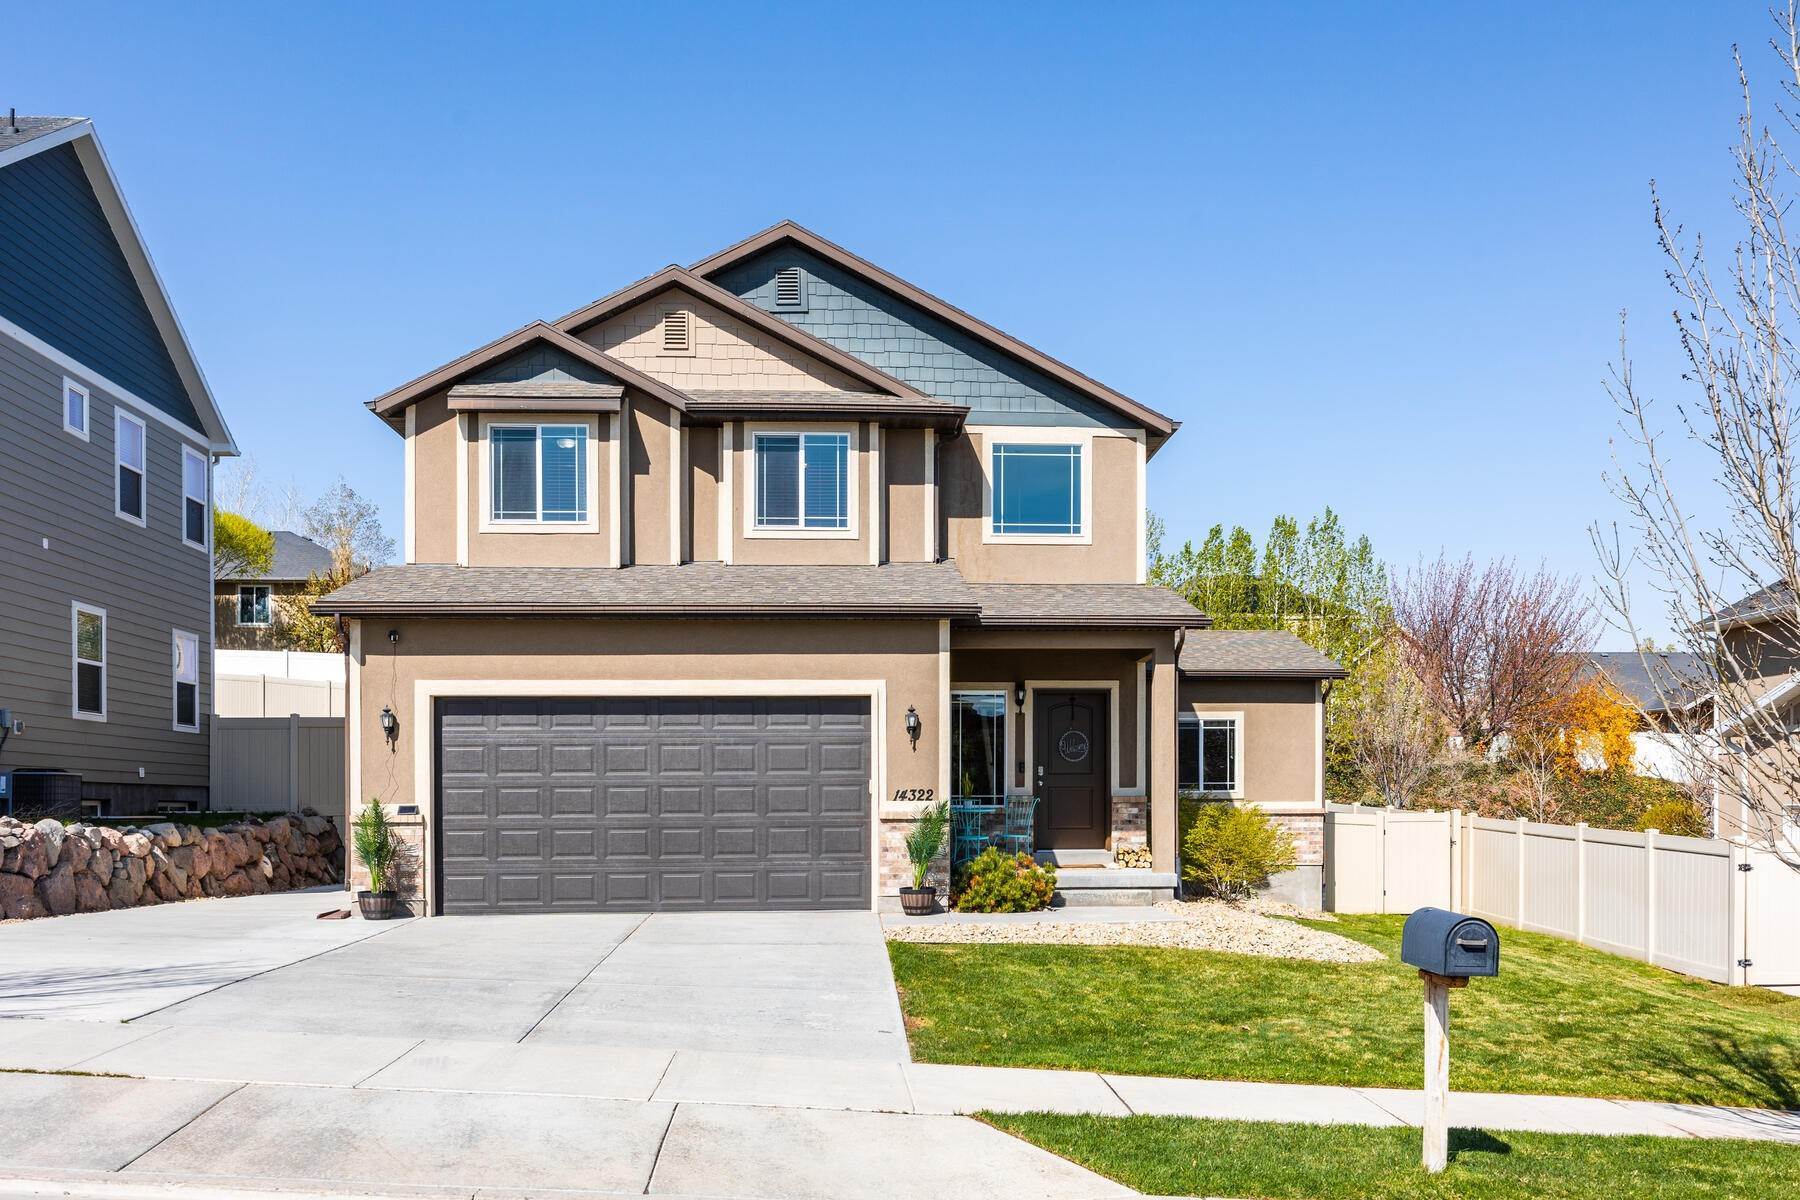 Property for Sale at Come See What it Feels Like to Spread Your Wings 14322 S Highfield Dr Herriman, Utah 84096 United States